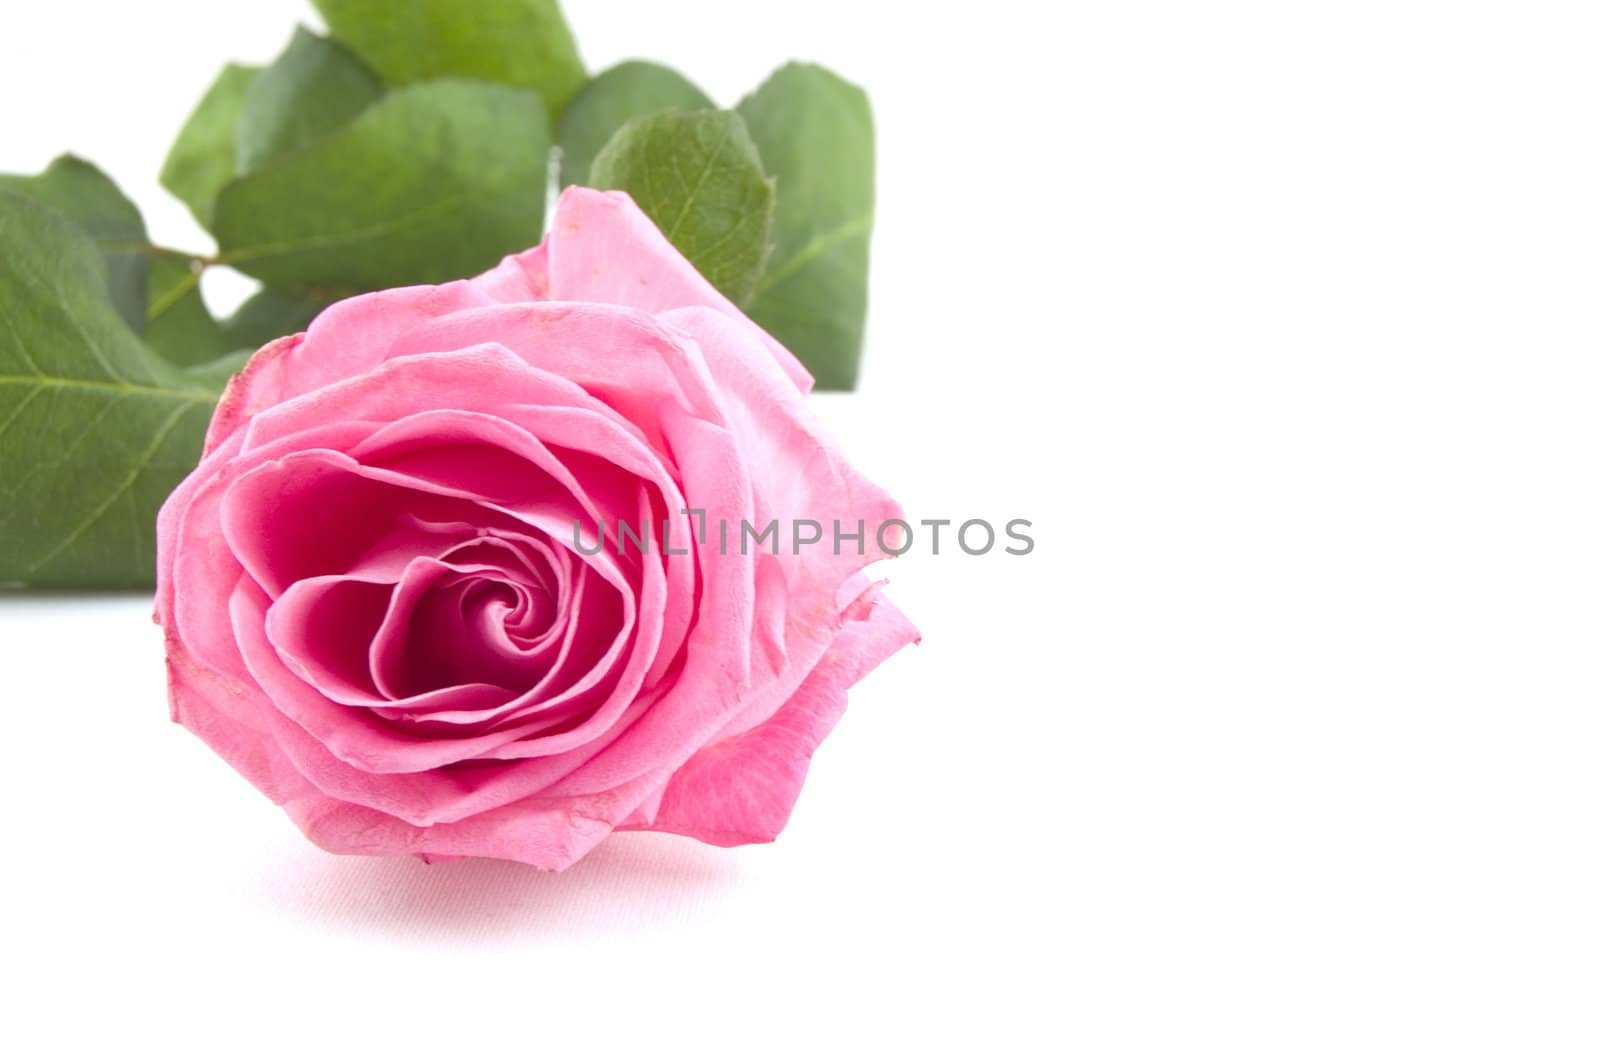 pink rose isolated on a white background